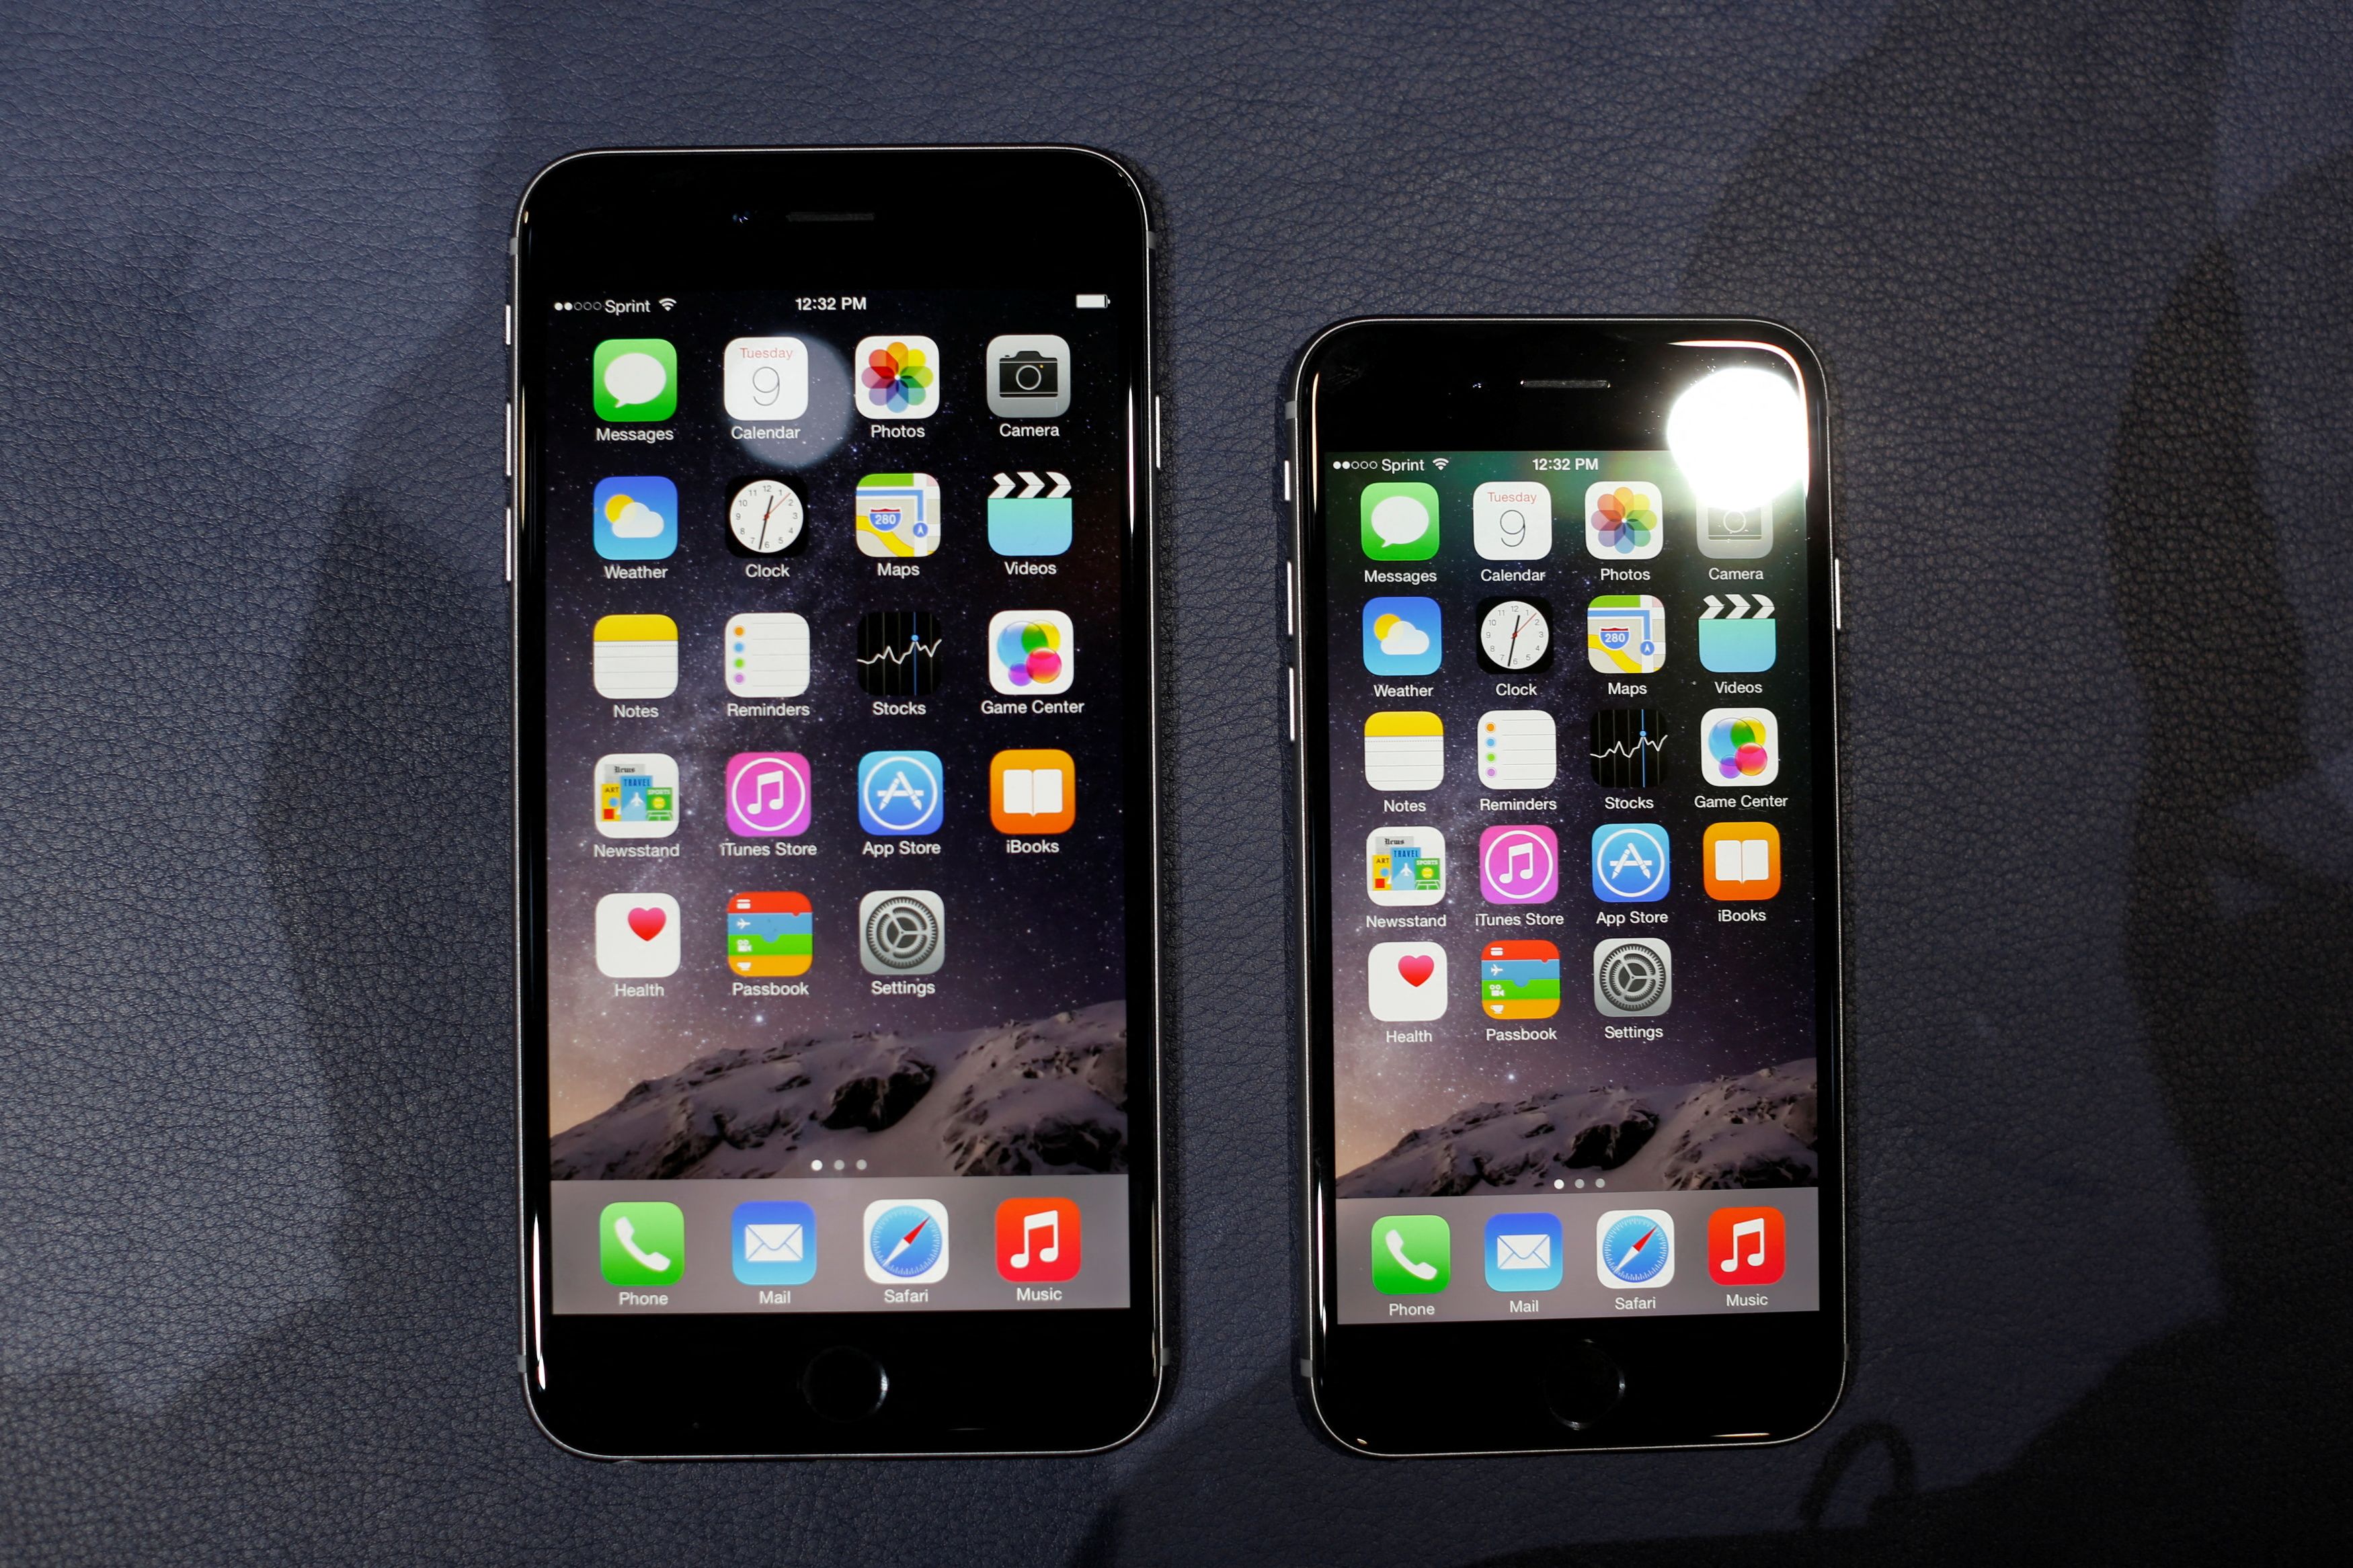 The iPhone 6 and the iPhone 6 Plus are shown during an Apple event at the Flint Center in Cupertino